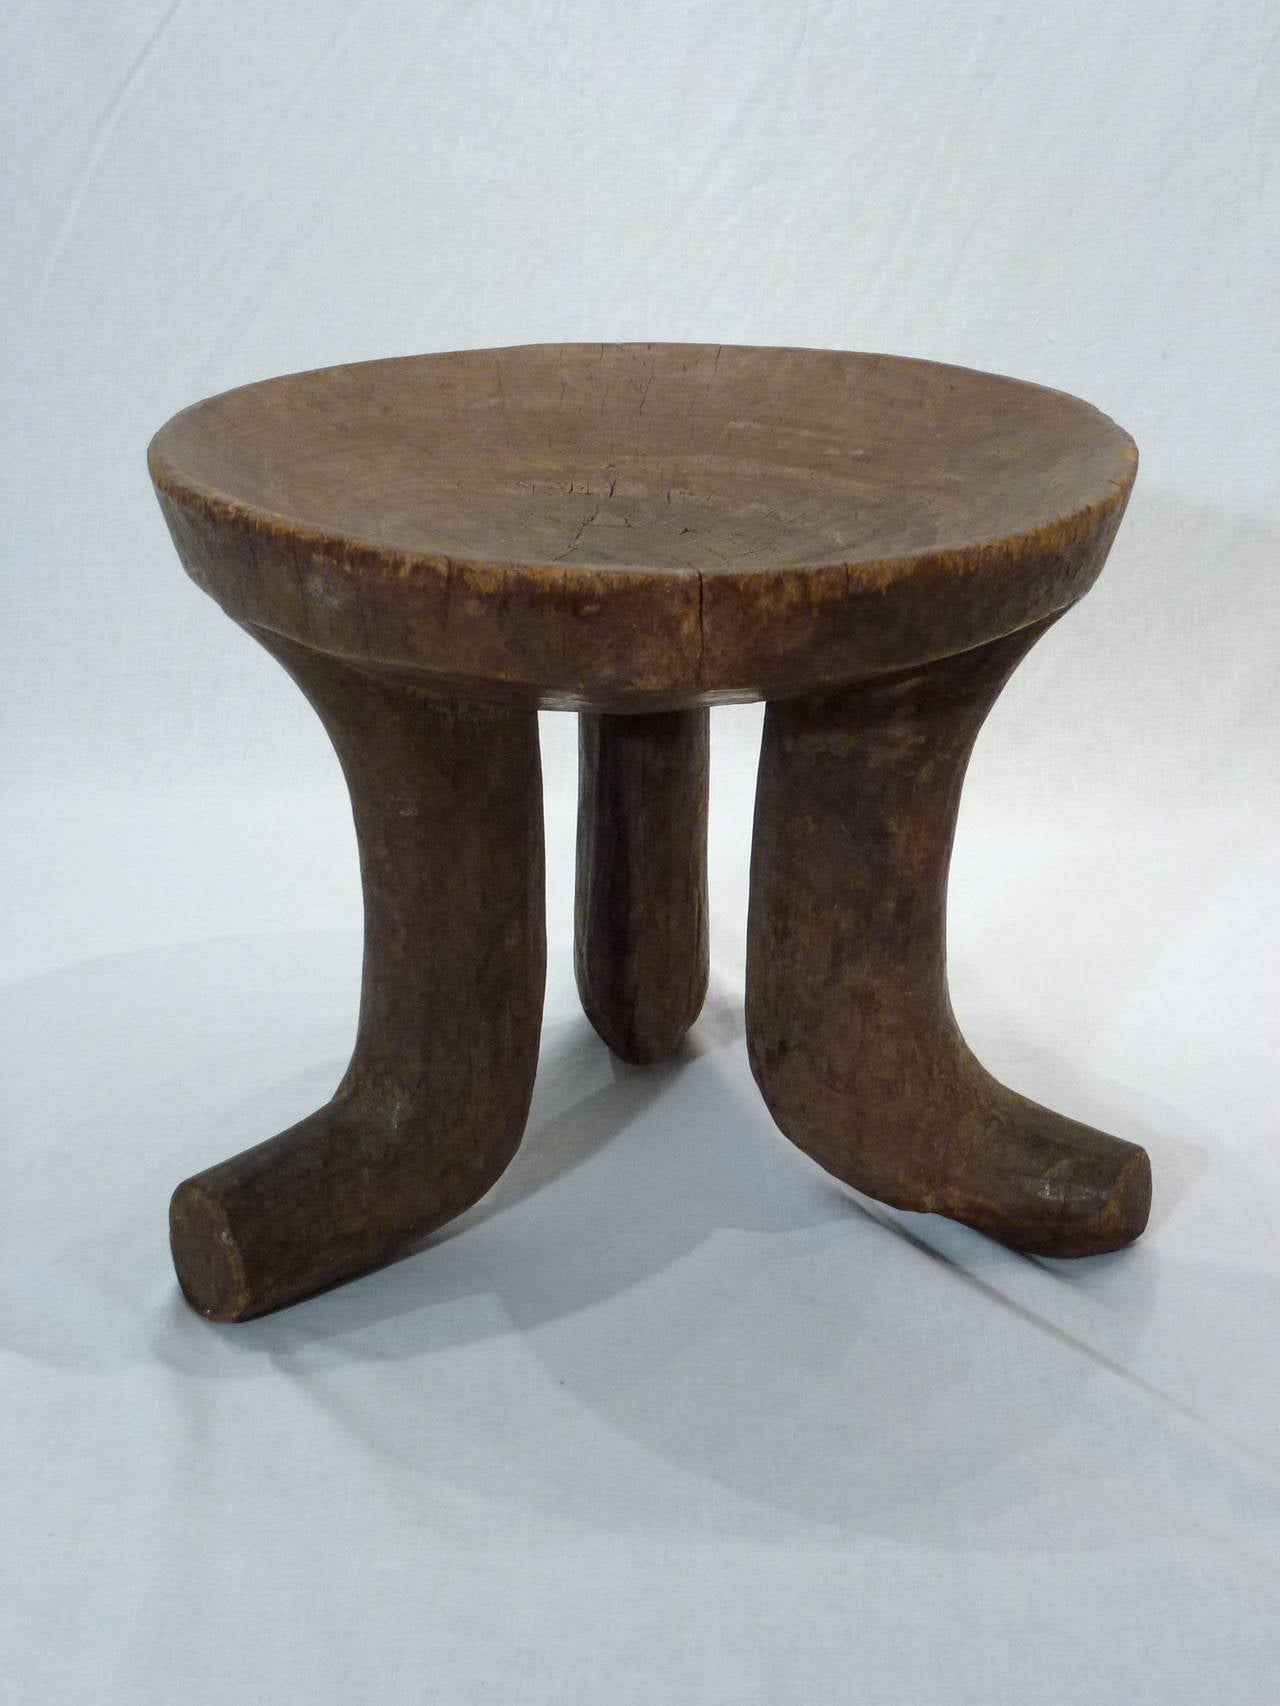 Beautiful Set of 2 African Hand Carved Stools from Ethiopia.  The Taller Round Senufo Stool Features 3 Flared Legs and a Concave Seat.  The Low Senufo Stool Boast 4 Thick Legs and a Wide Rectangular Seat. Each are Hand Carved from a Single Piece of